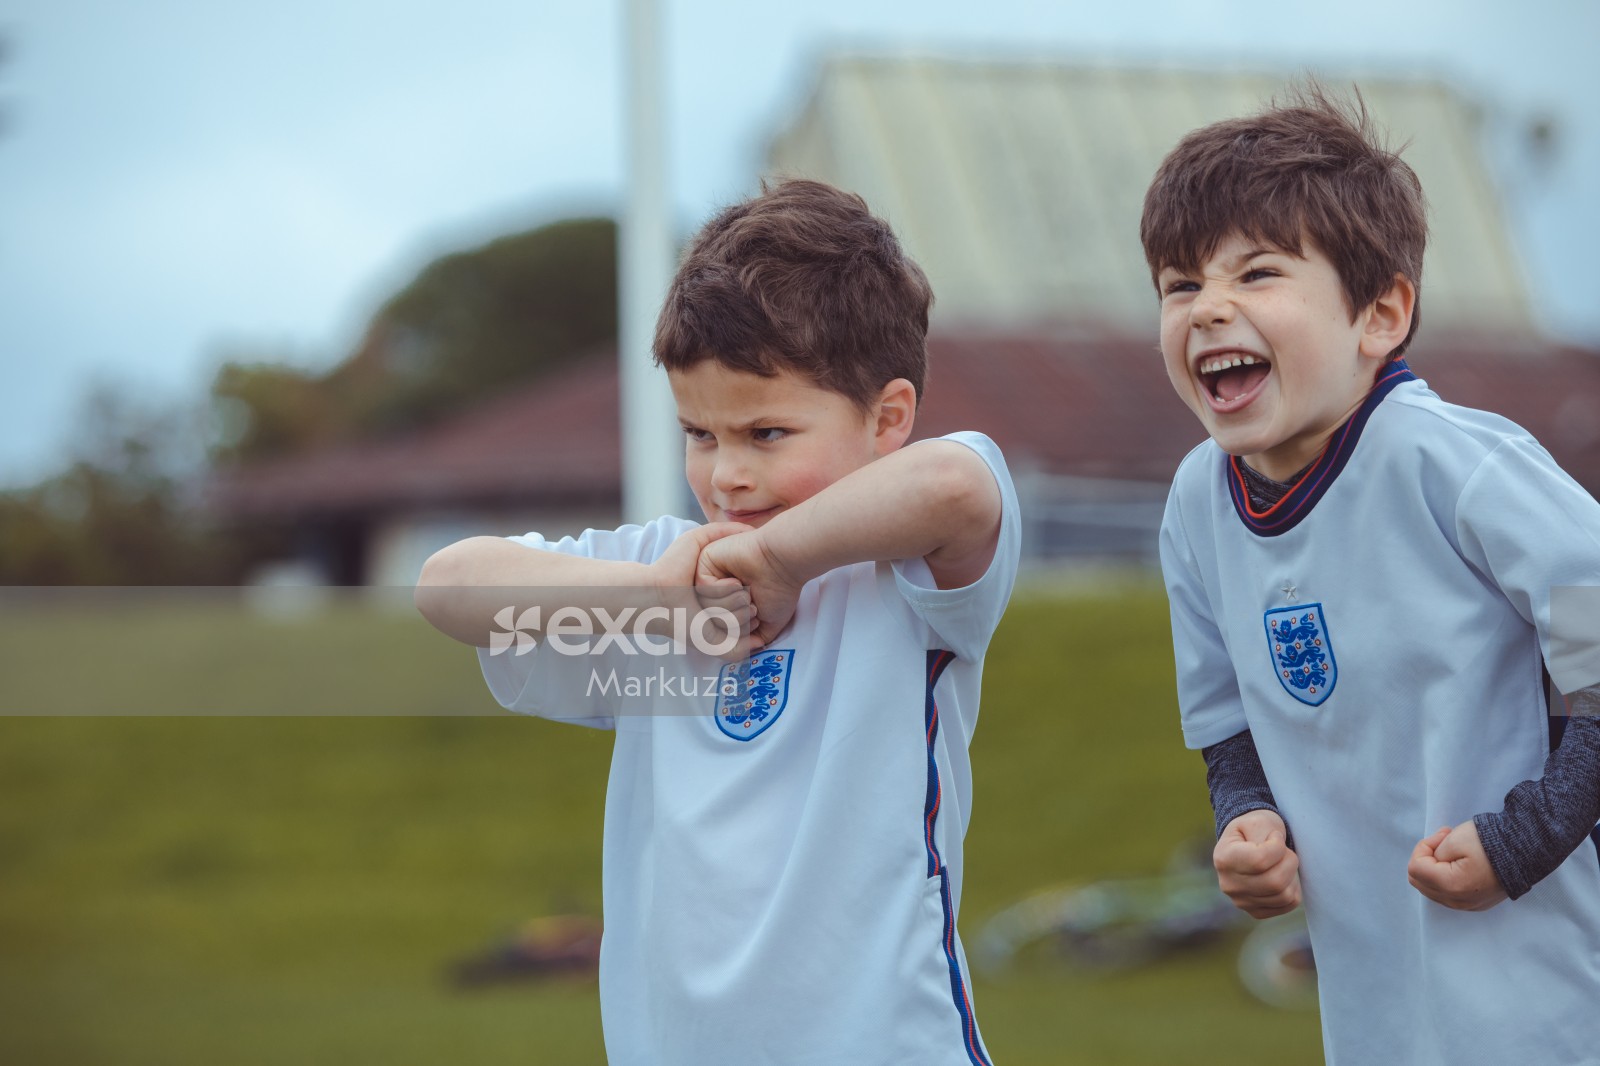 Boys in white shirts excited at Little Dribblers football match